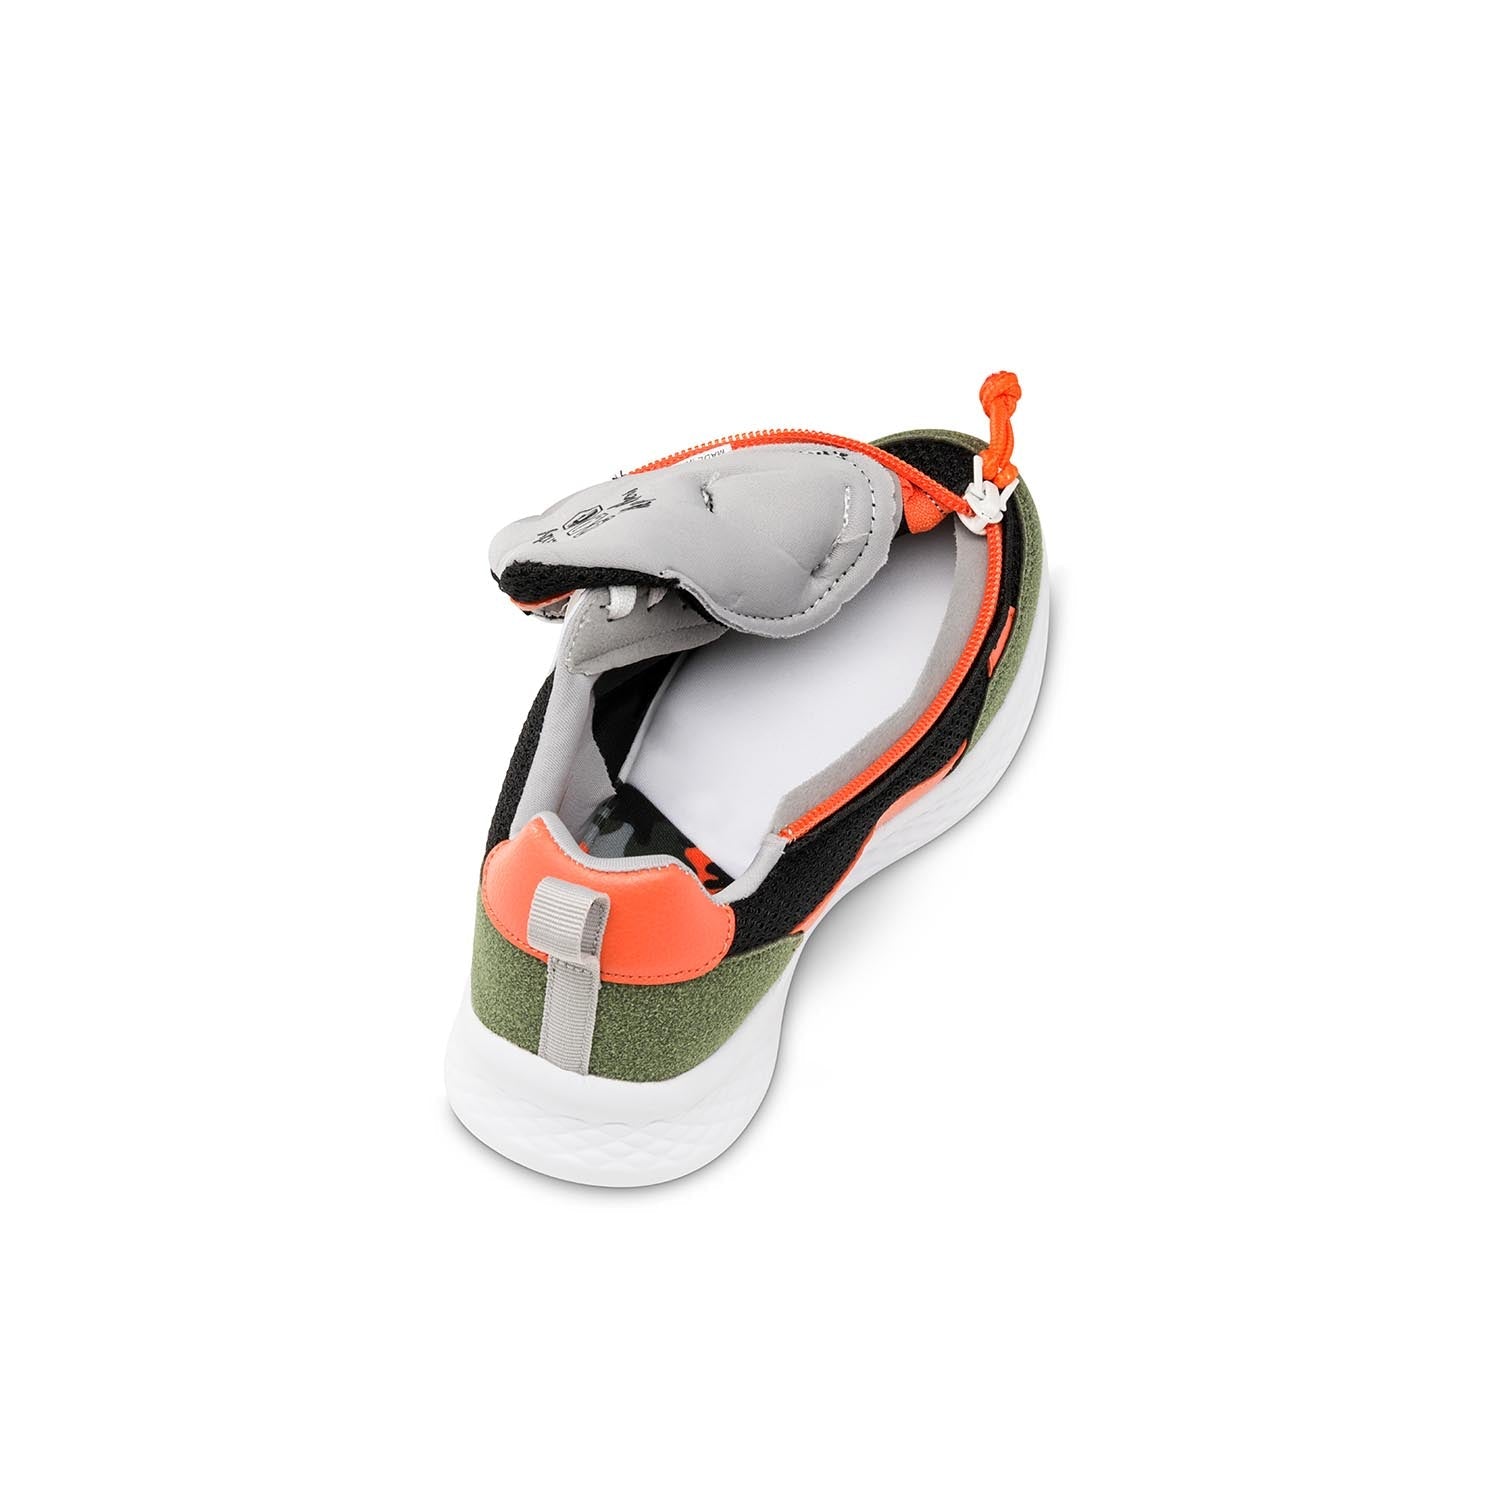 Orange, black and dark green kids shoe unzipped with front zipper access and white interior padding.